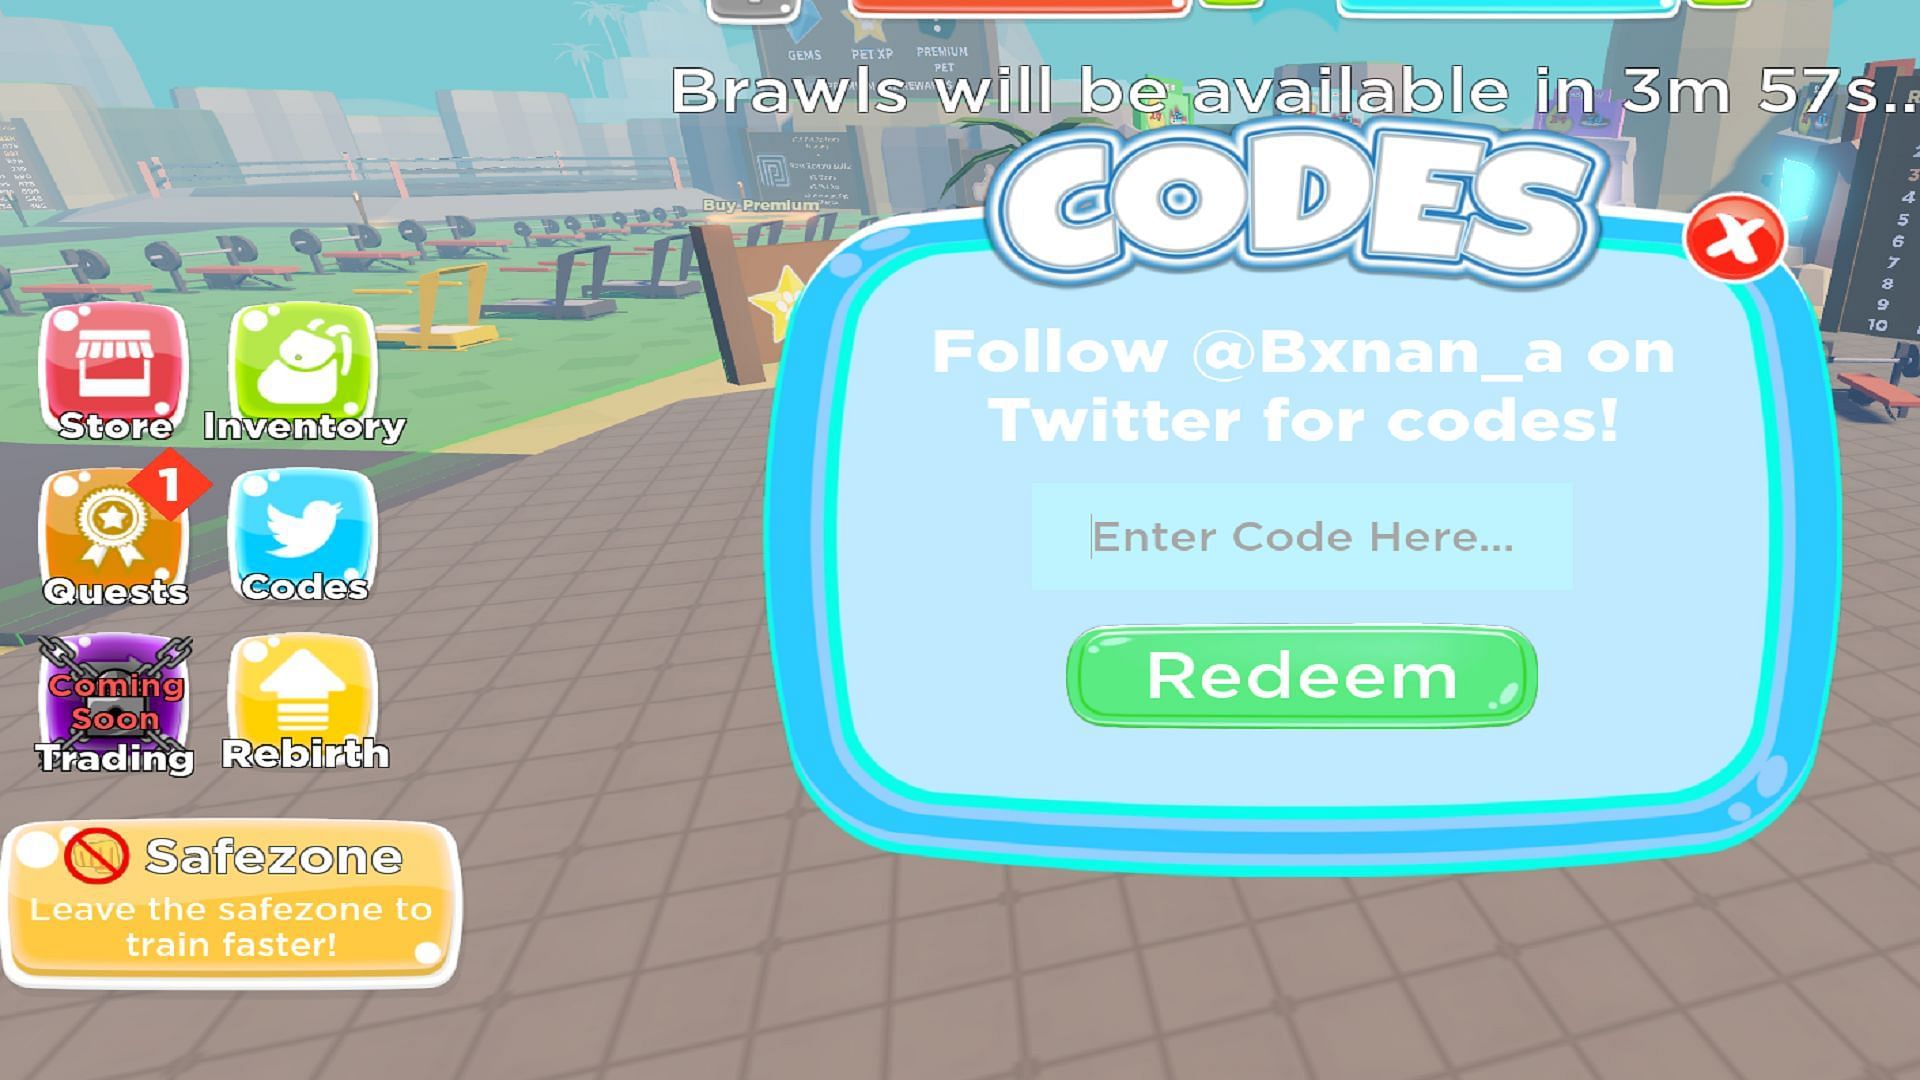 Using the in-game code redemption system (Image via Sportskeeda)